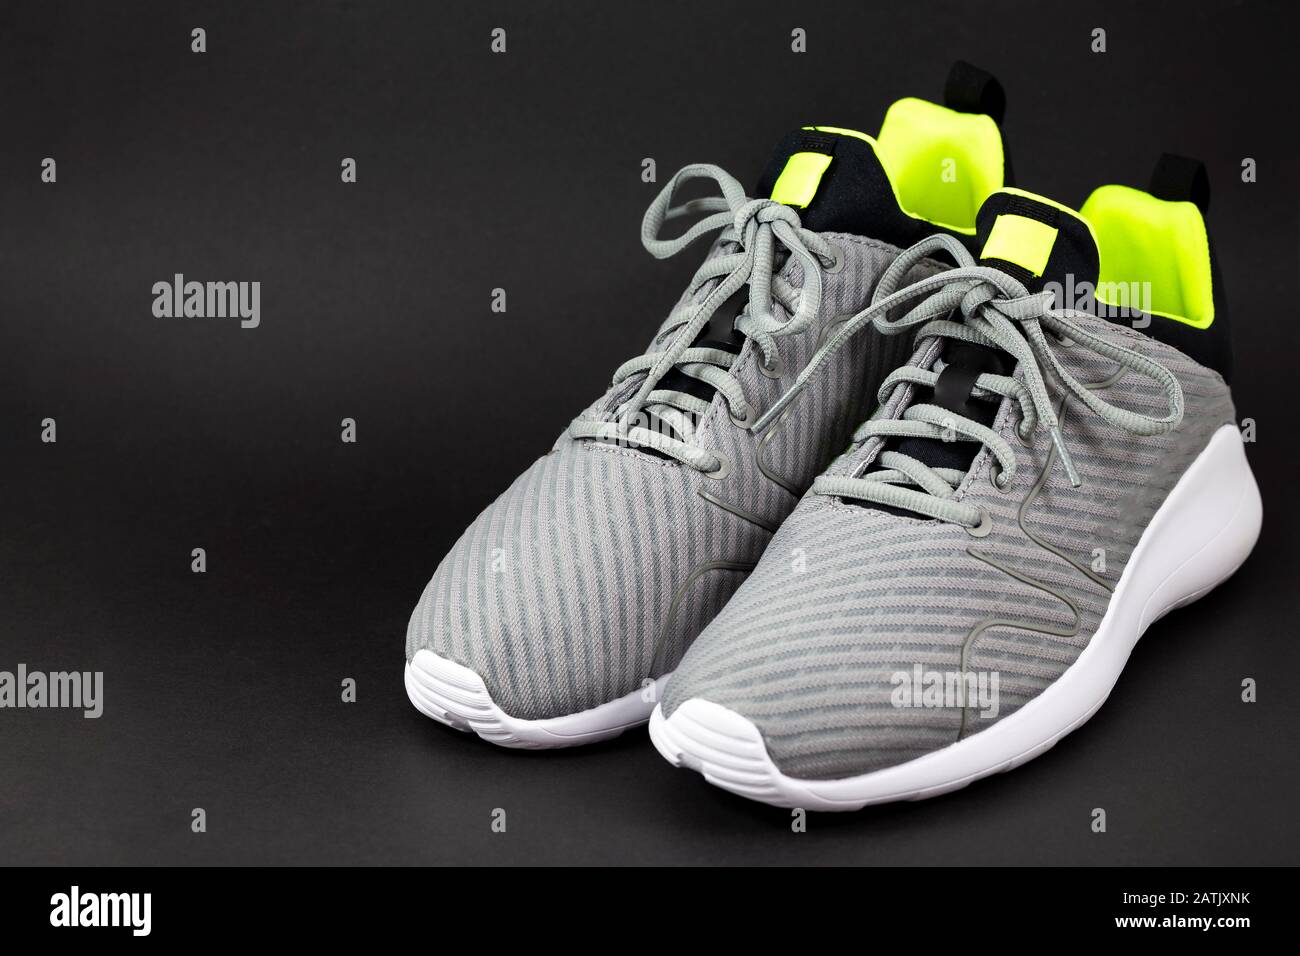 Shop display of new sneakers running shoes for men isolated on the black background. Stock Photo